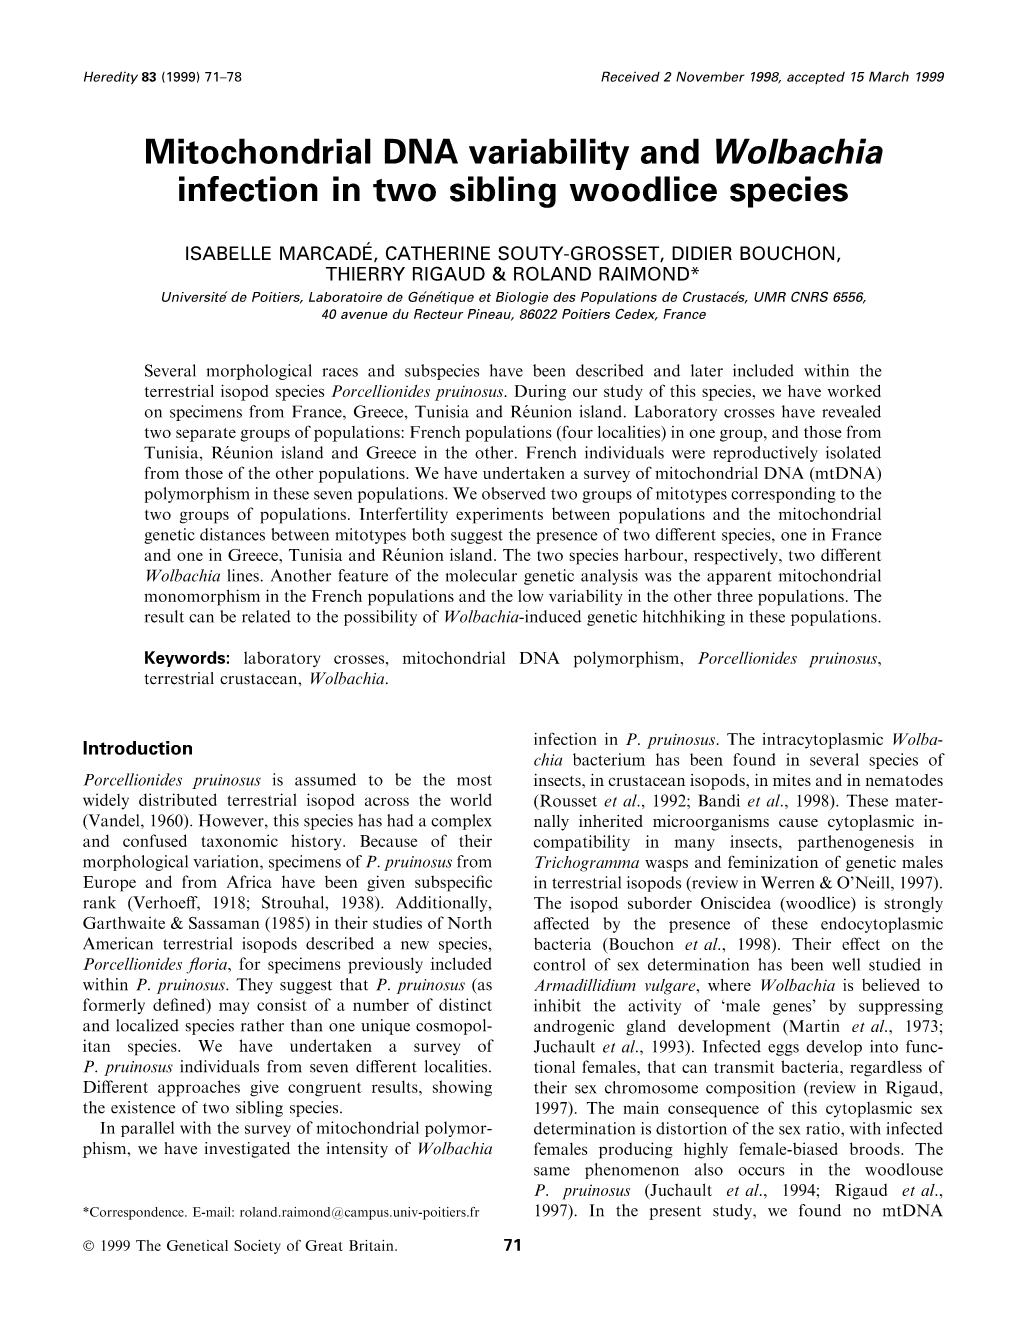 Mitochondrial DNA Variability and Wolbachia Infection in Two Sibling Woodlice Species